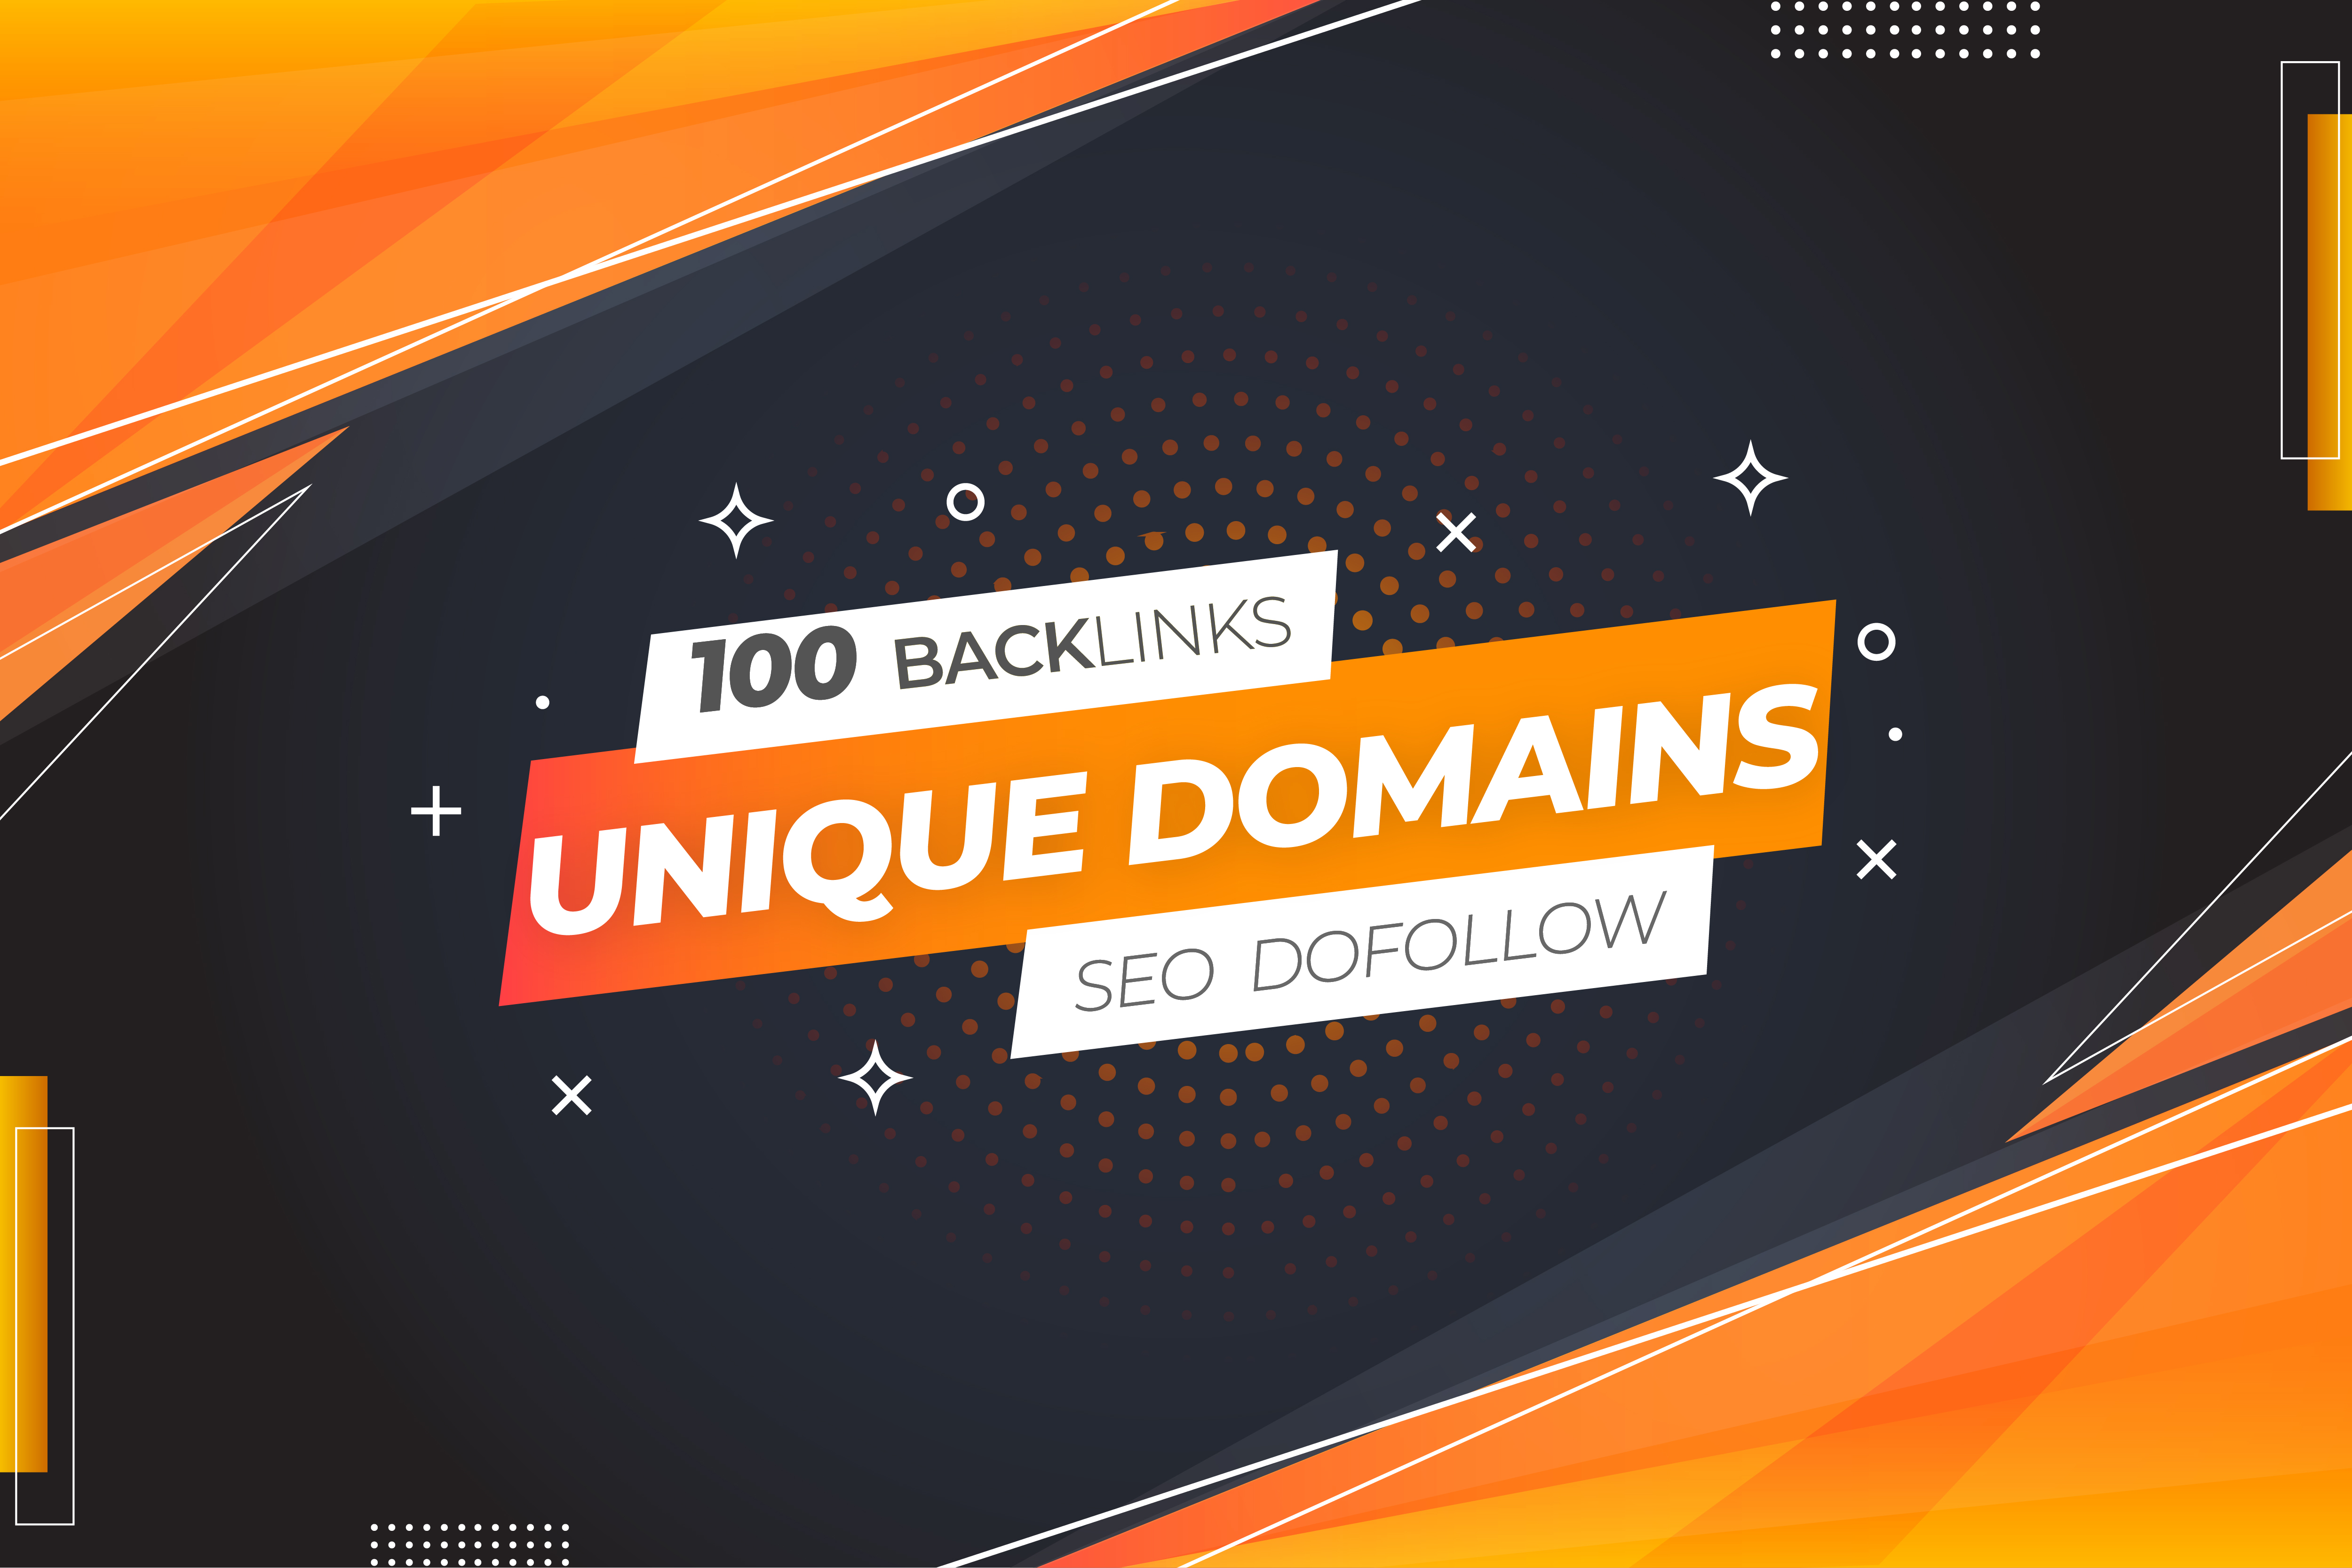 I will create manual 100 seo backlinks dofollow pages on unique domain